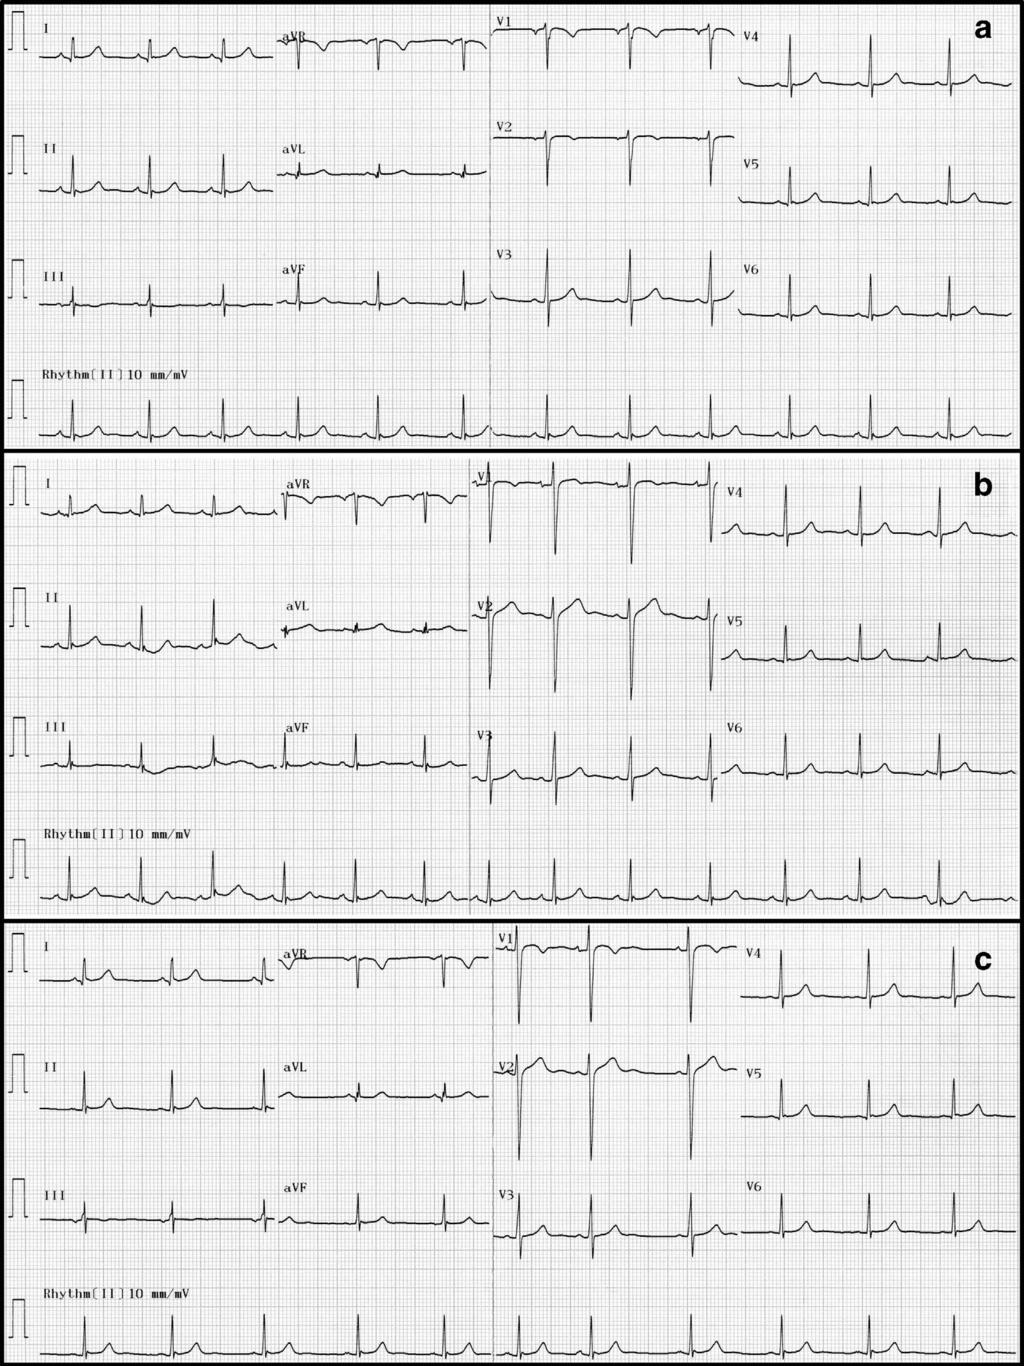 4 Figure 2 Repeat ECGs for the S422L homozygous sibling. (a) Twelve-lead ECG with V1 and V2 leads placed at the left and right second intercostal spaces, respectively.